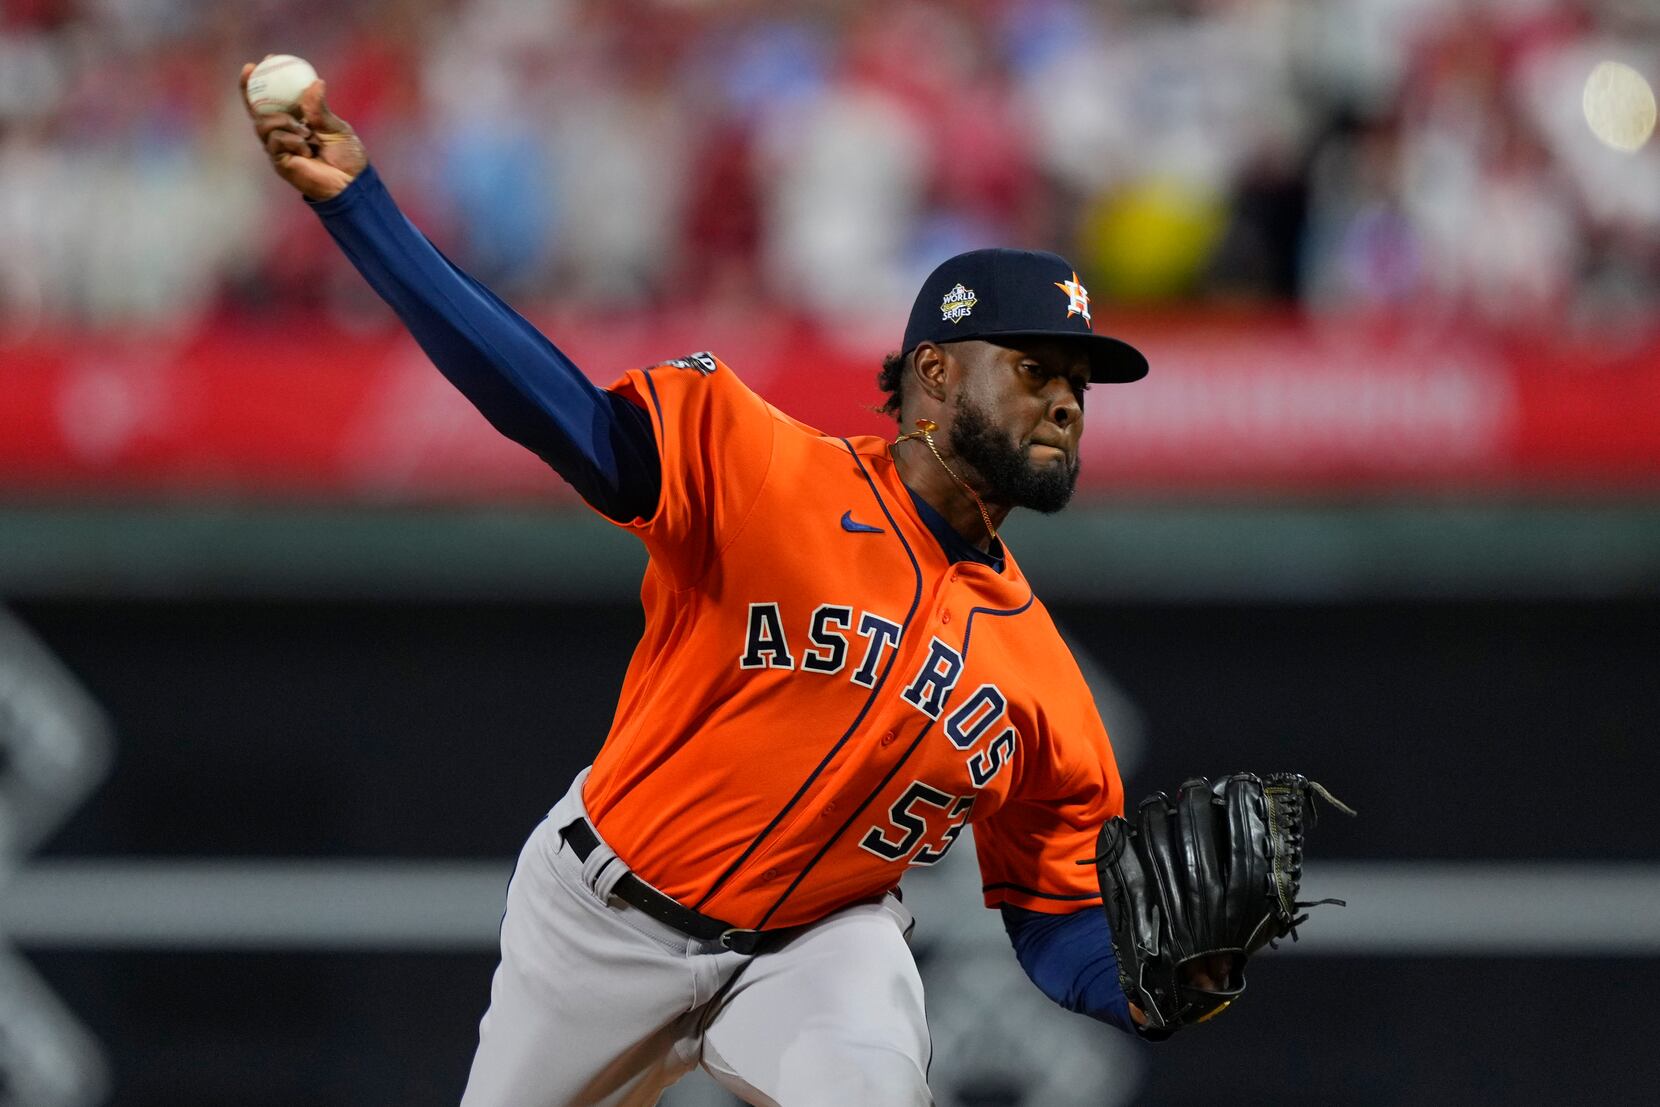 Photos of Astros no-hit 5-0 victory over Phillies